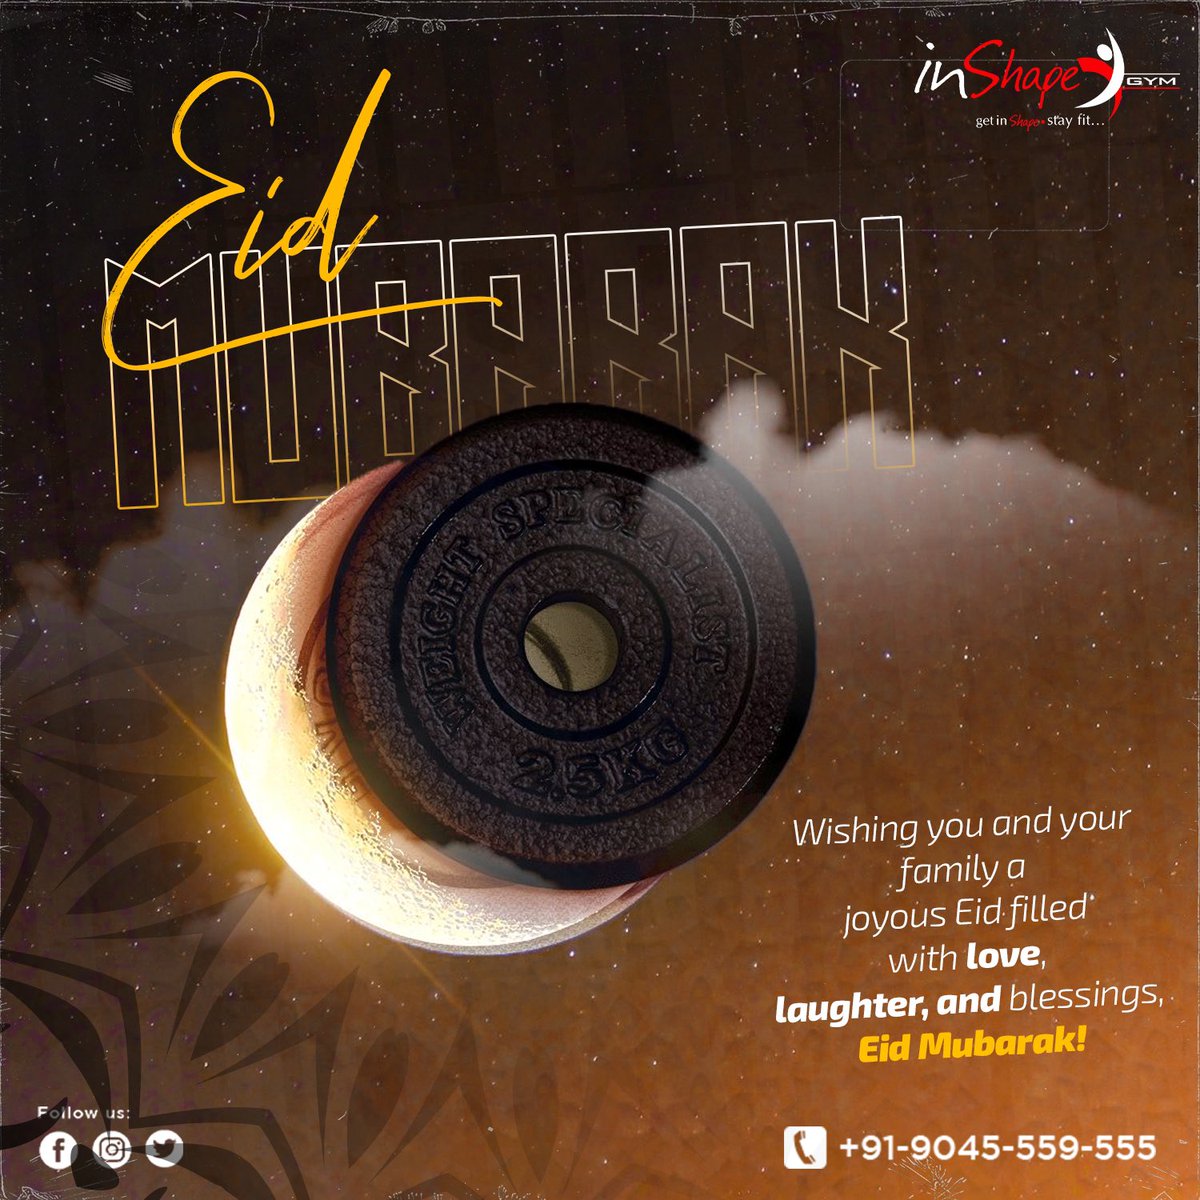 Eid Mubarak from the Inshape Gym family! Wishing you a day filled with joy, blessings and fitness gains. 💪🎉 

#InshapeGym #EidMubarak #InshapeStrong #EidFitness #StrengthAndBlessings #InshapeCelebrates #GymGains #EidJoy #FitnessFamily #EidMubarak2024